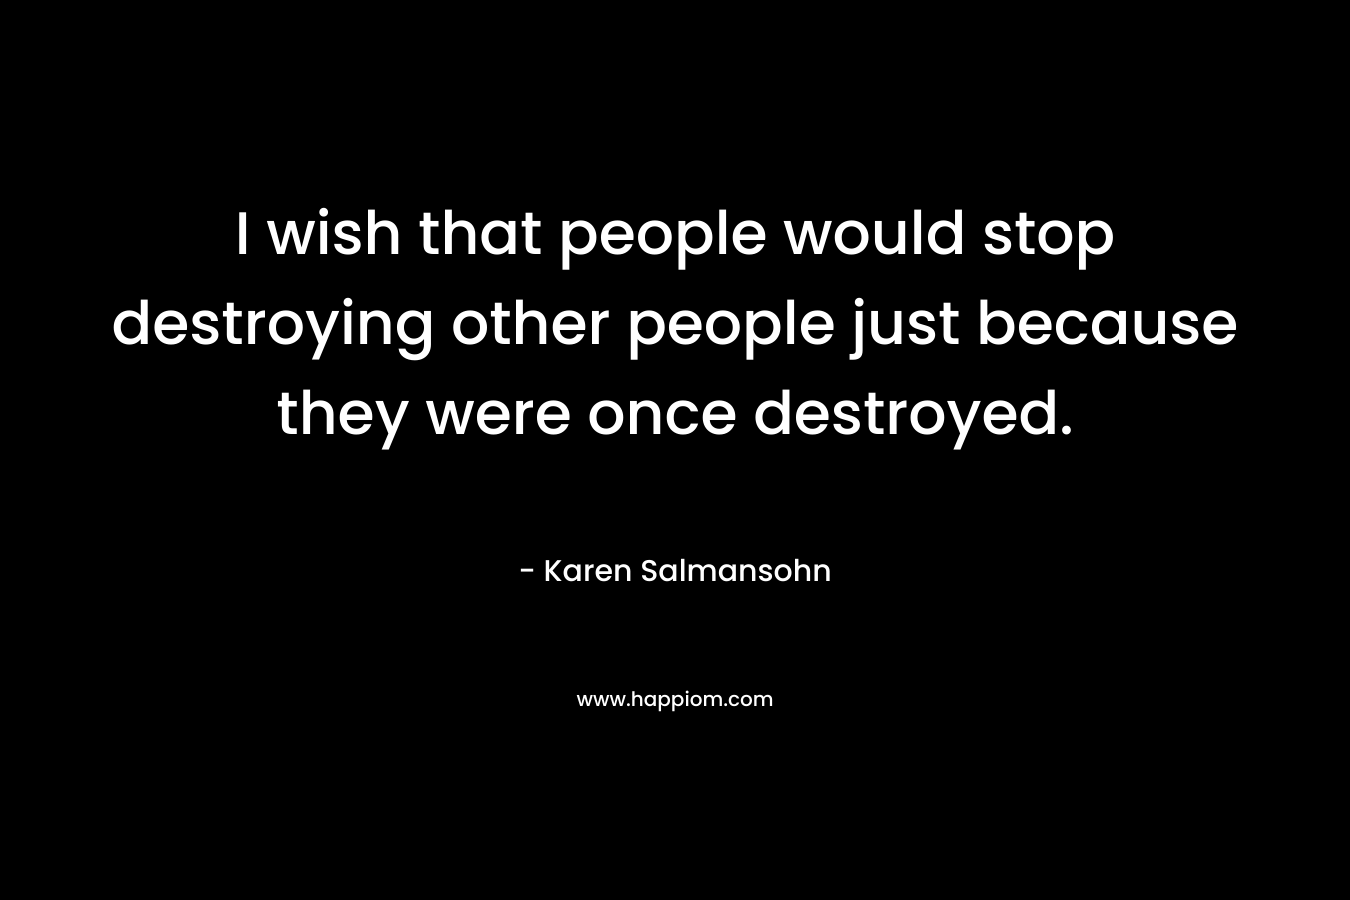 I wish that people would stop destroying other people just because they were once destroyed.